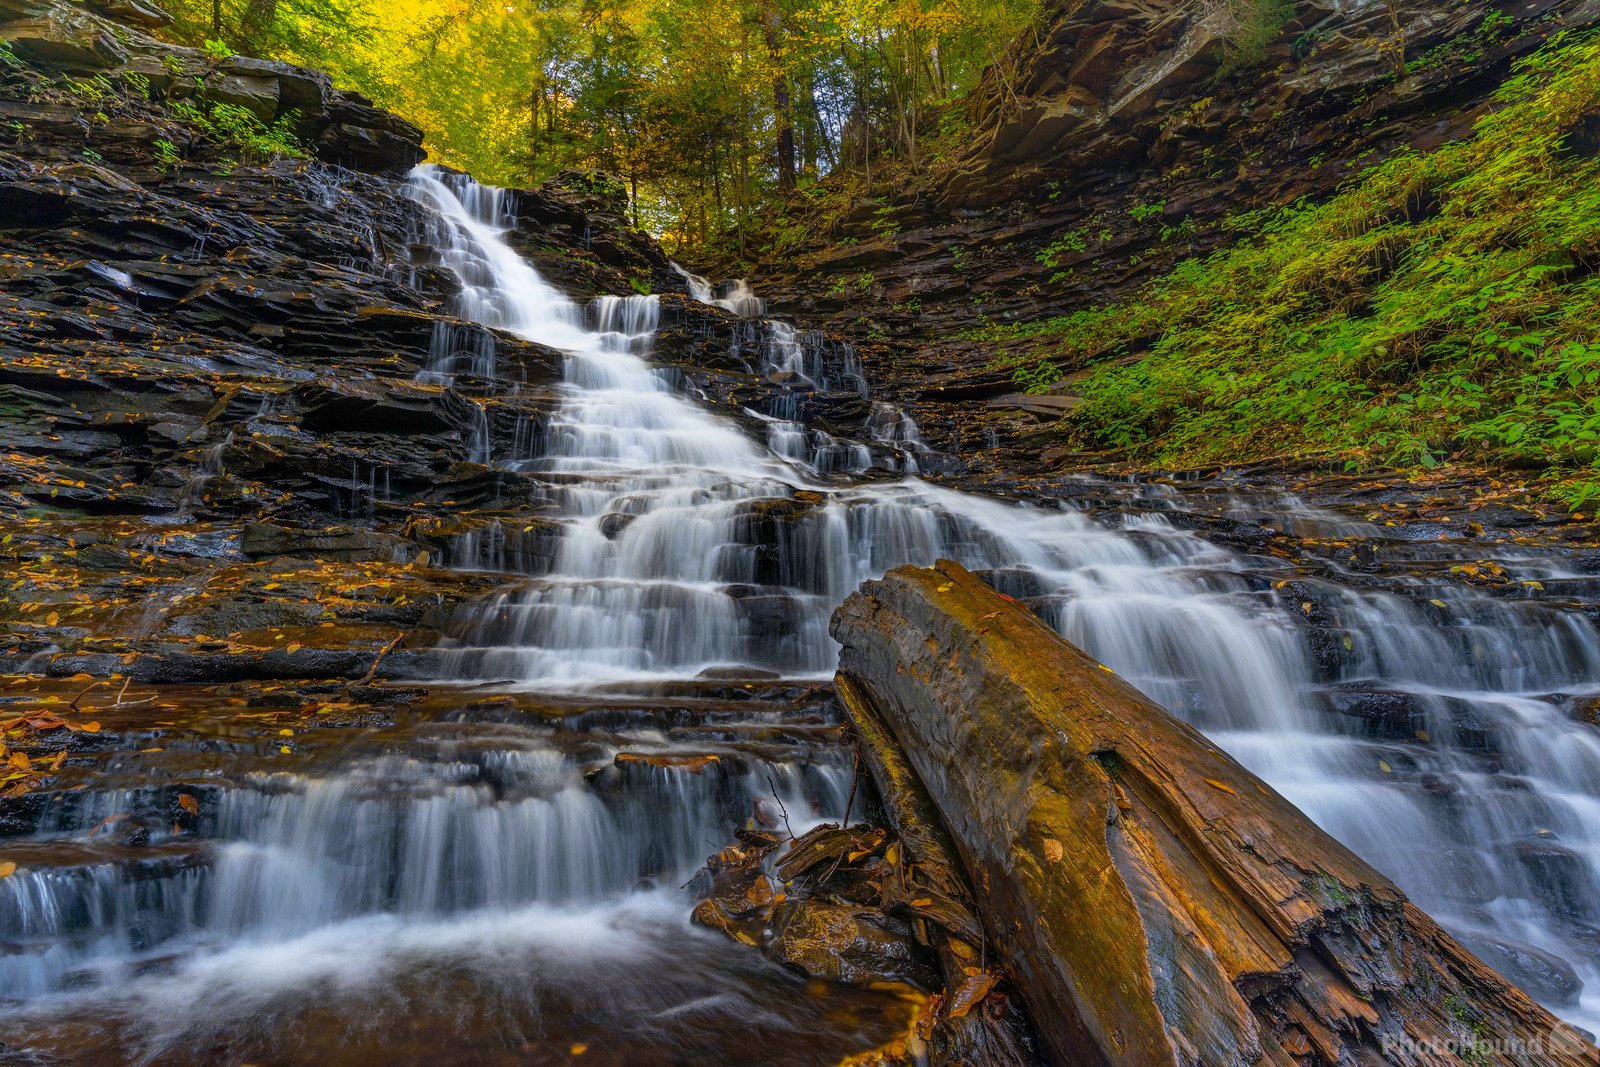 Image of Ricketts Glen State Park by Dave Fredrickson